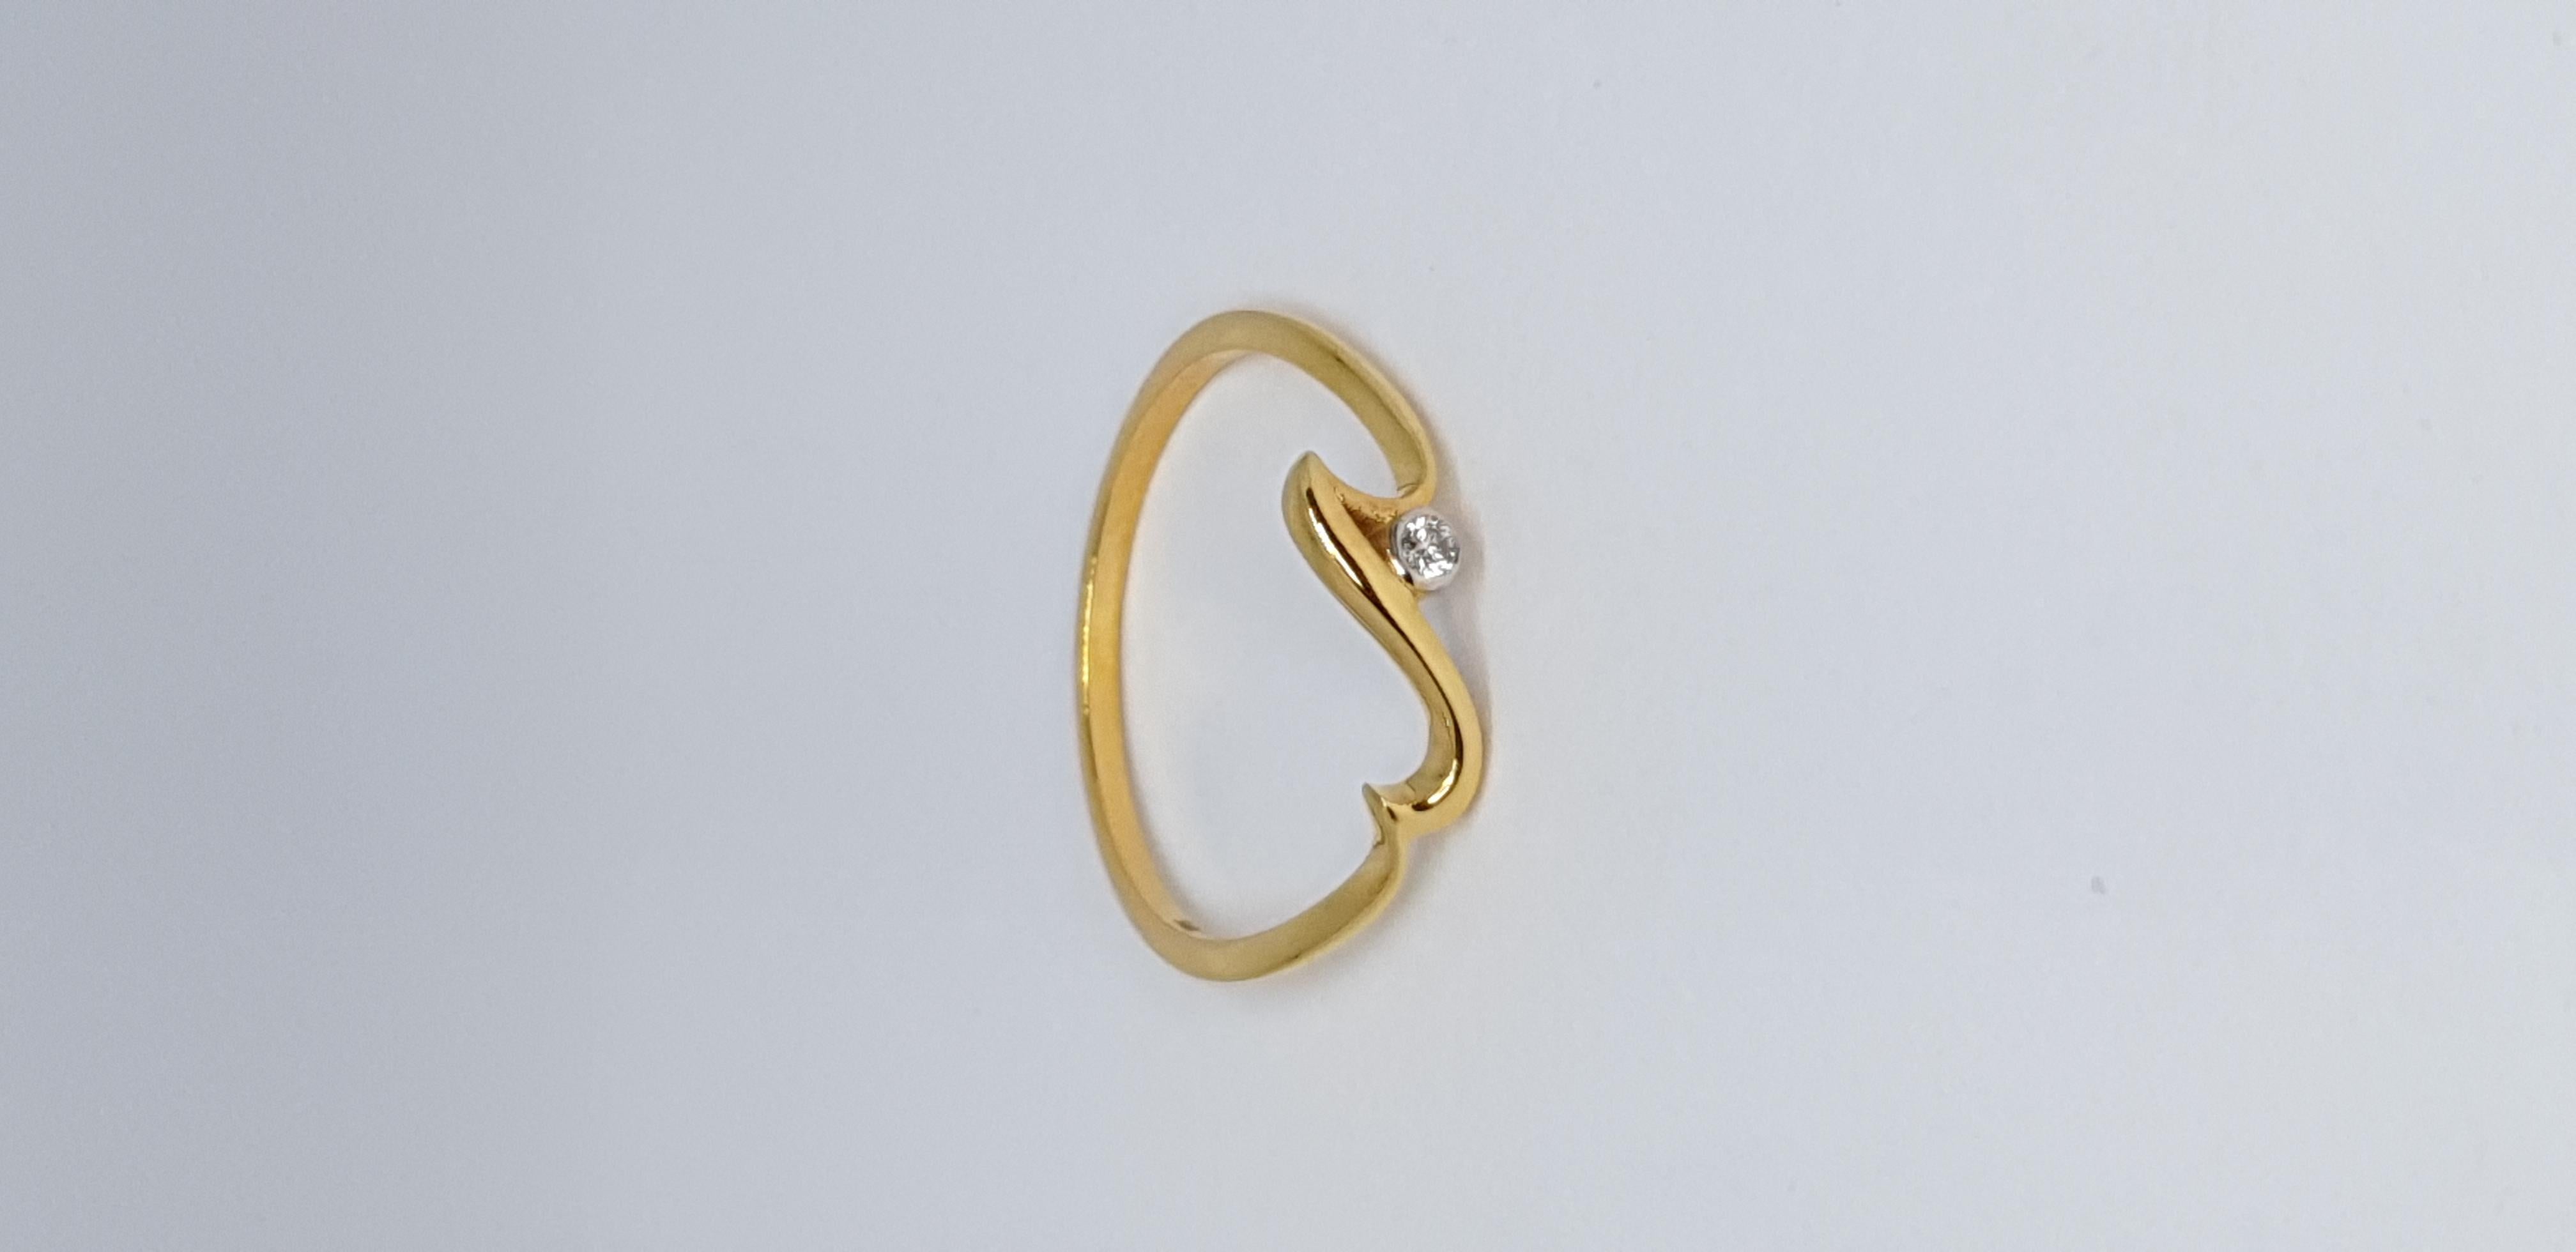 For Sale:  Natural Diamond Wave Ring 14K Solid Gold Dainty Ocean Lover Jewelry Gift. 17